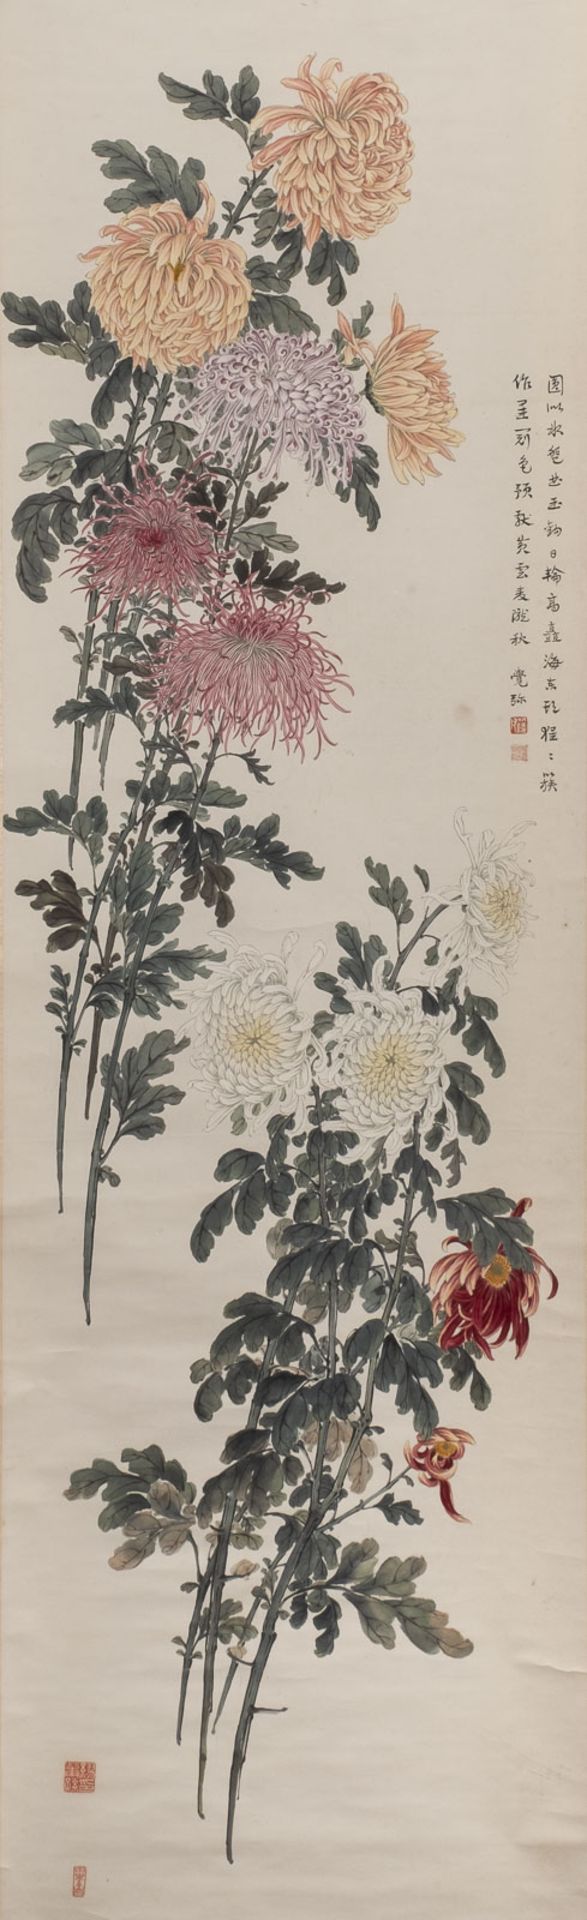 MIAO GUYING, HERBSTCHRYSANTHEME